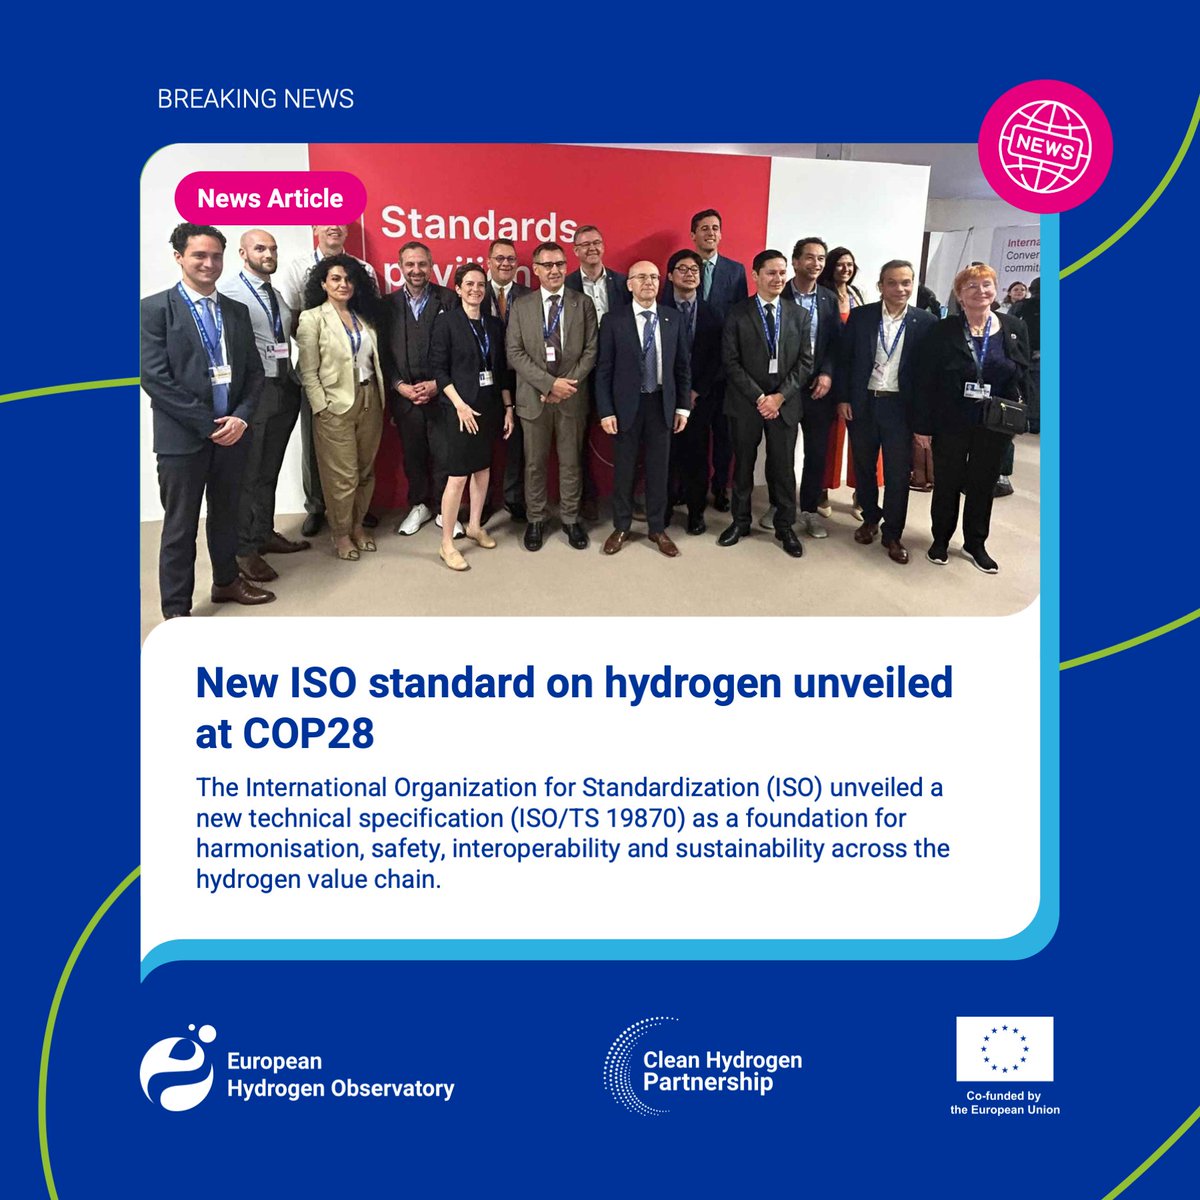 During #COP28 in Dubai, @isostandards revealed a new technical specification crucial for hydrogen standardization and a efficient global hydrogen economy ⚡️🌱 Read more 👉 bit.ly/NewsISO #HydrogenObservatory #HydrogenEconomy #CleanHydrogen #climatestandards